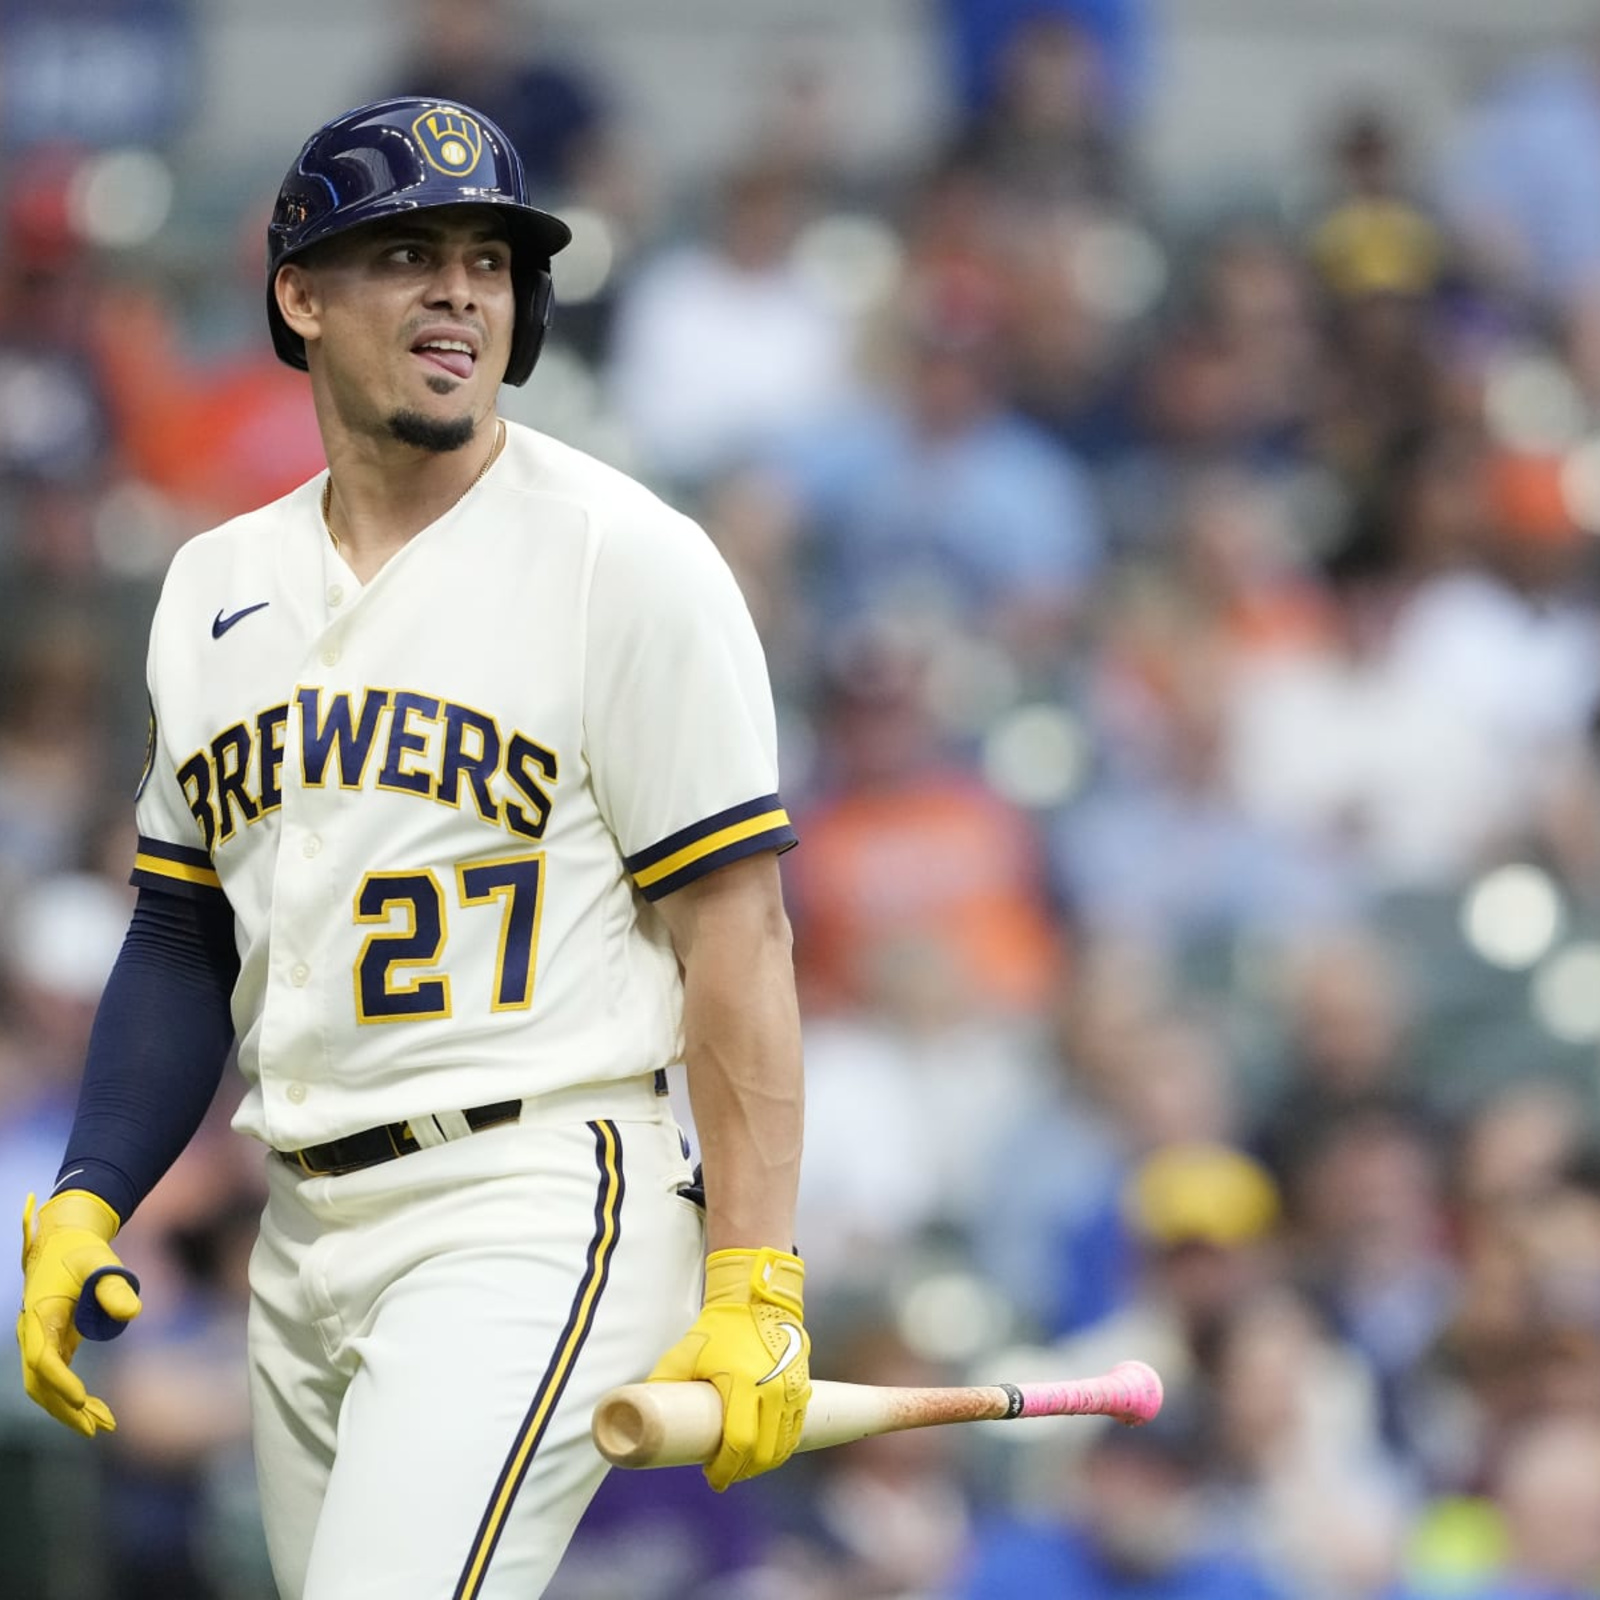 Brewers' Adames returns less than 2 weeks after getting hit in